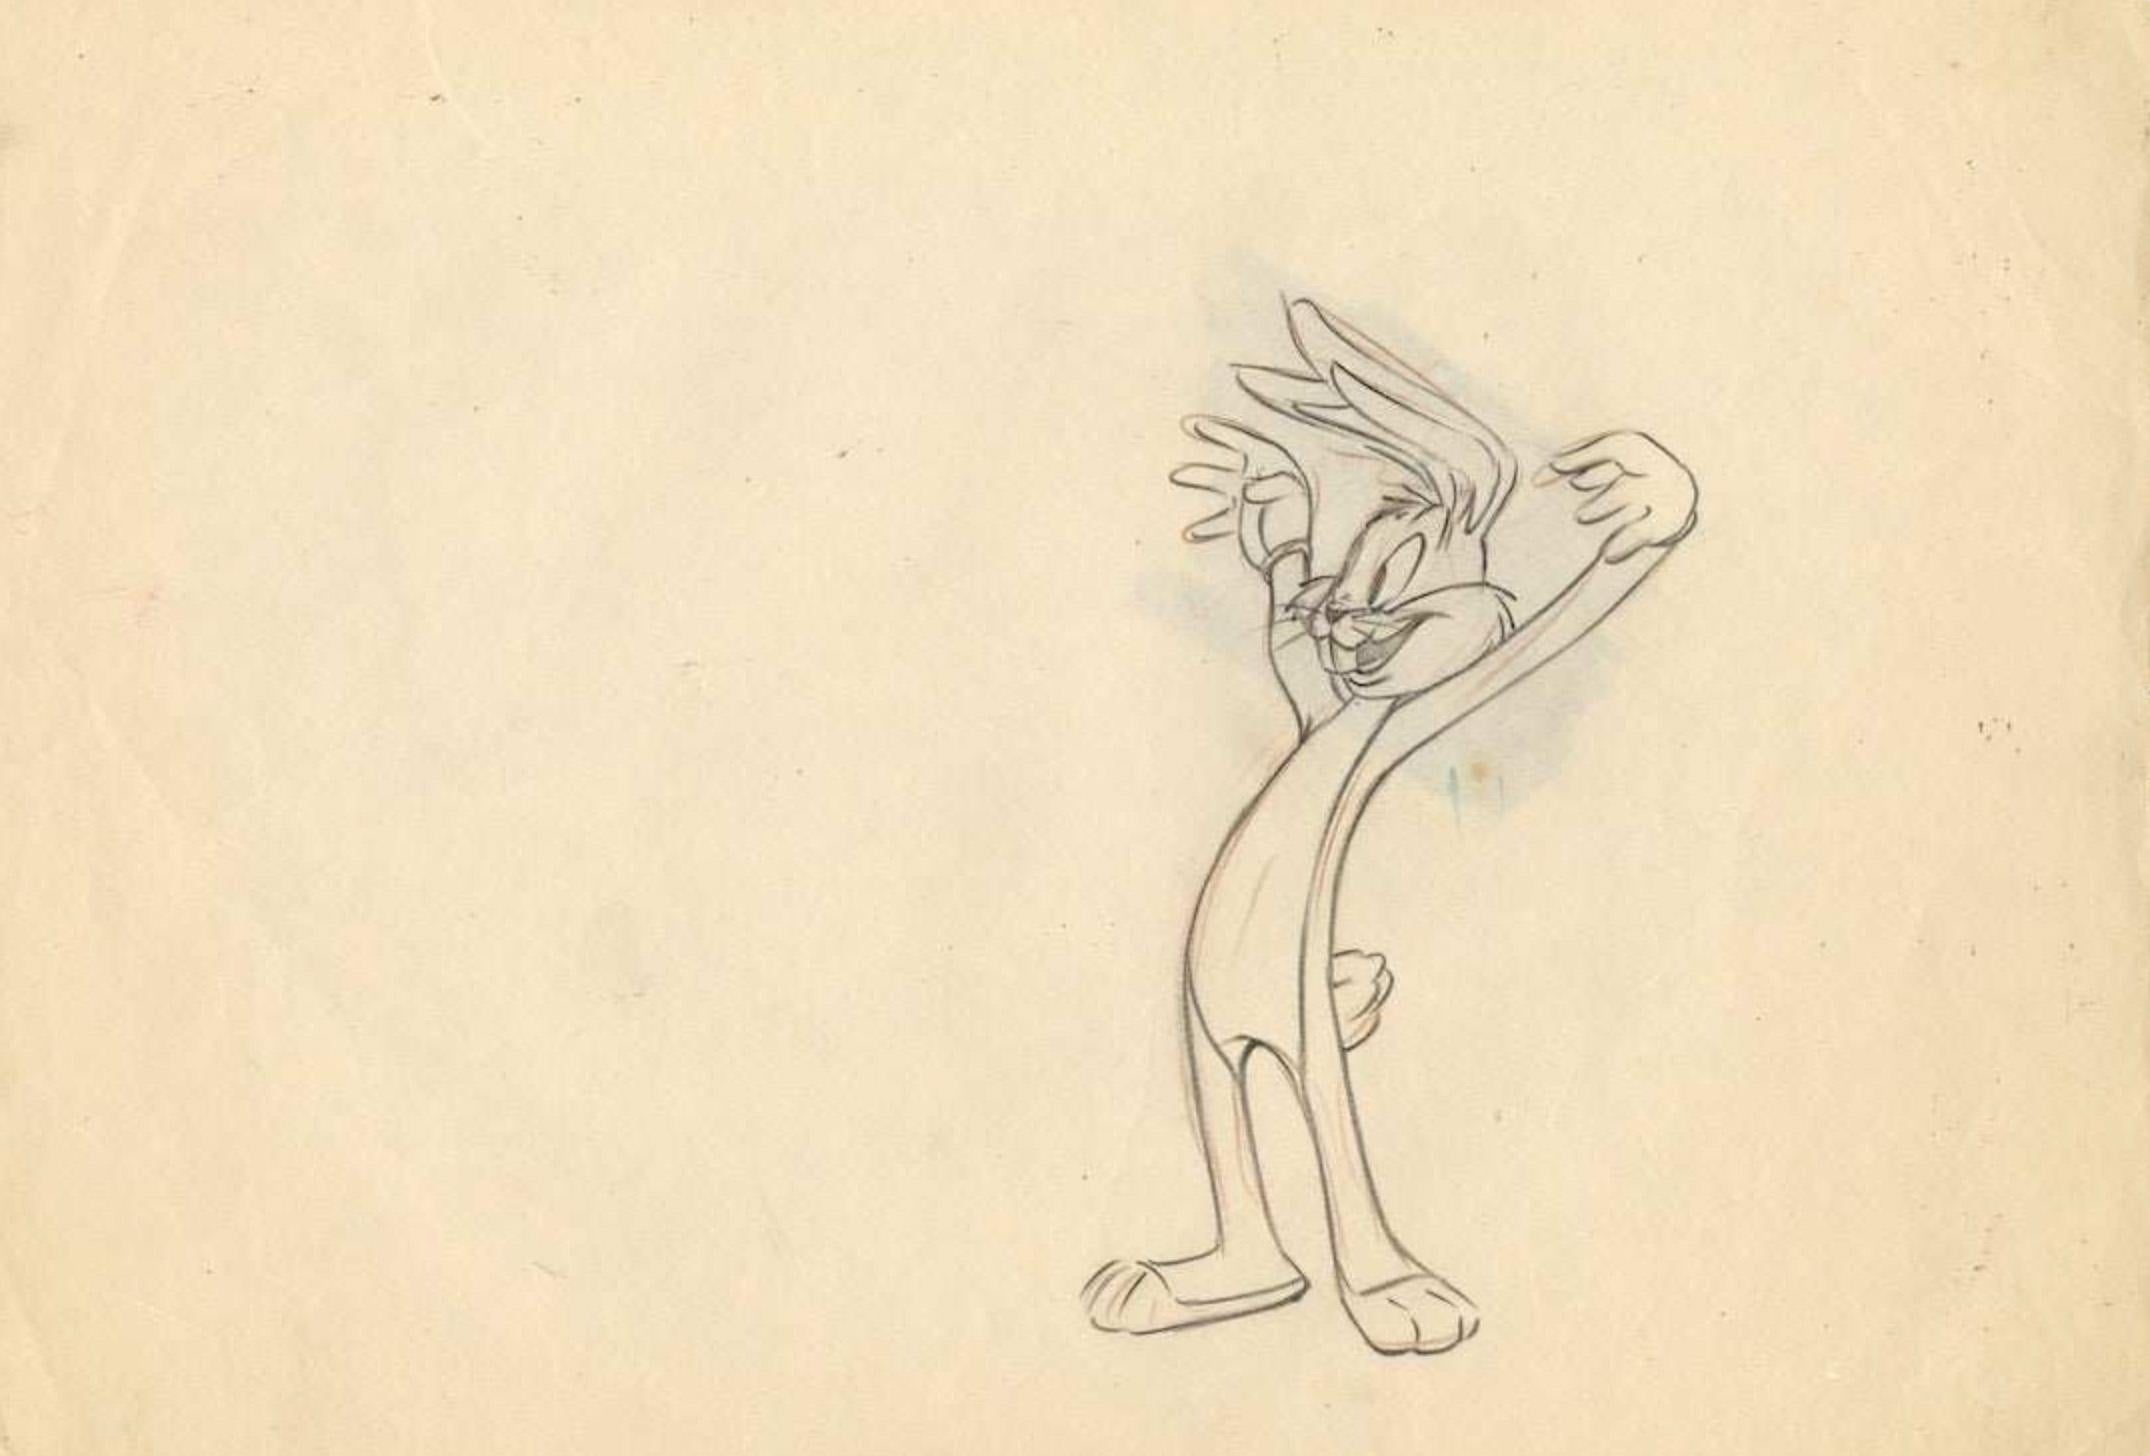 Bugs Bunny and the Three Bears (1944) Original Production Drawing: Bugs Bunny